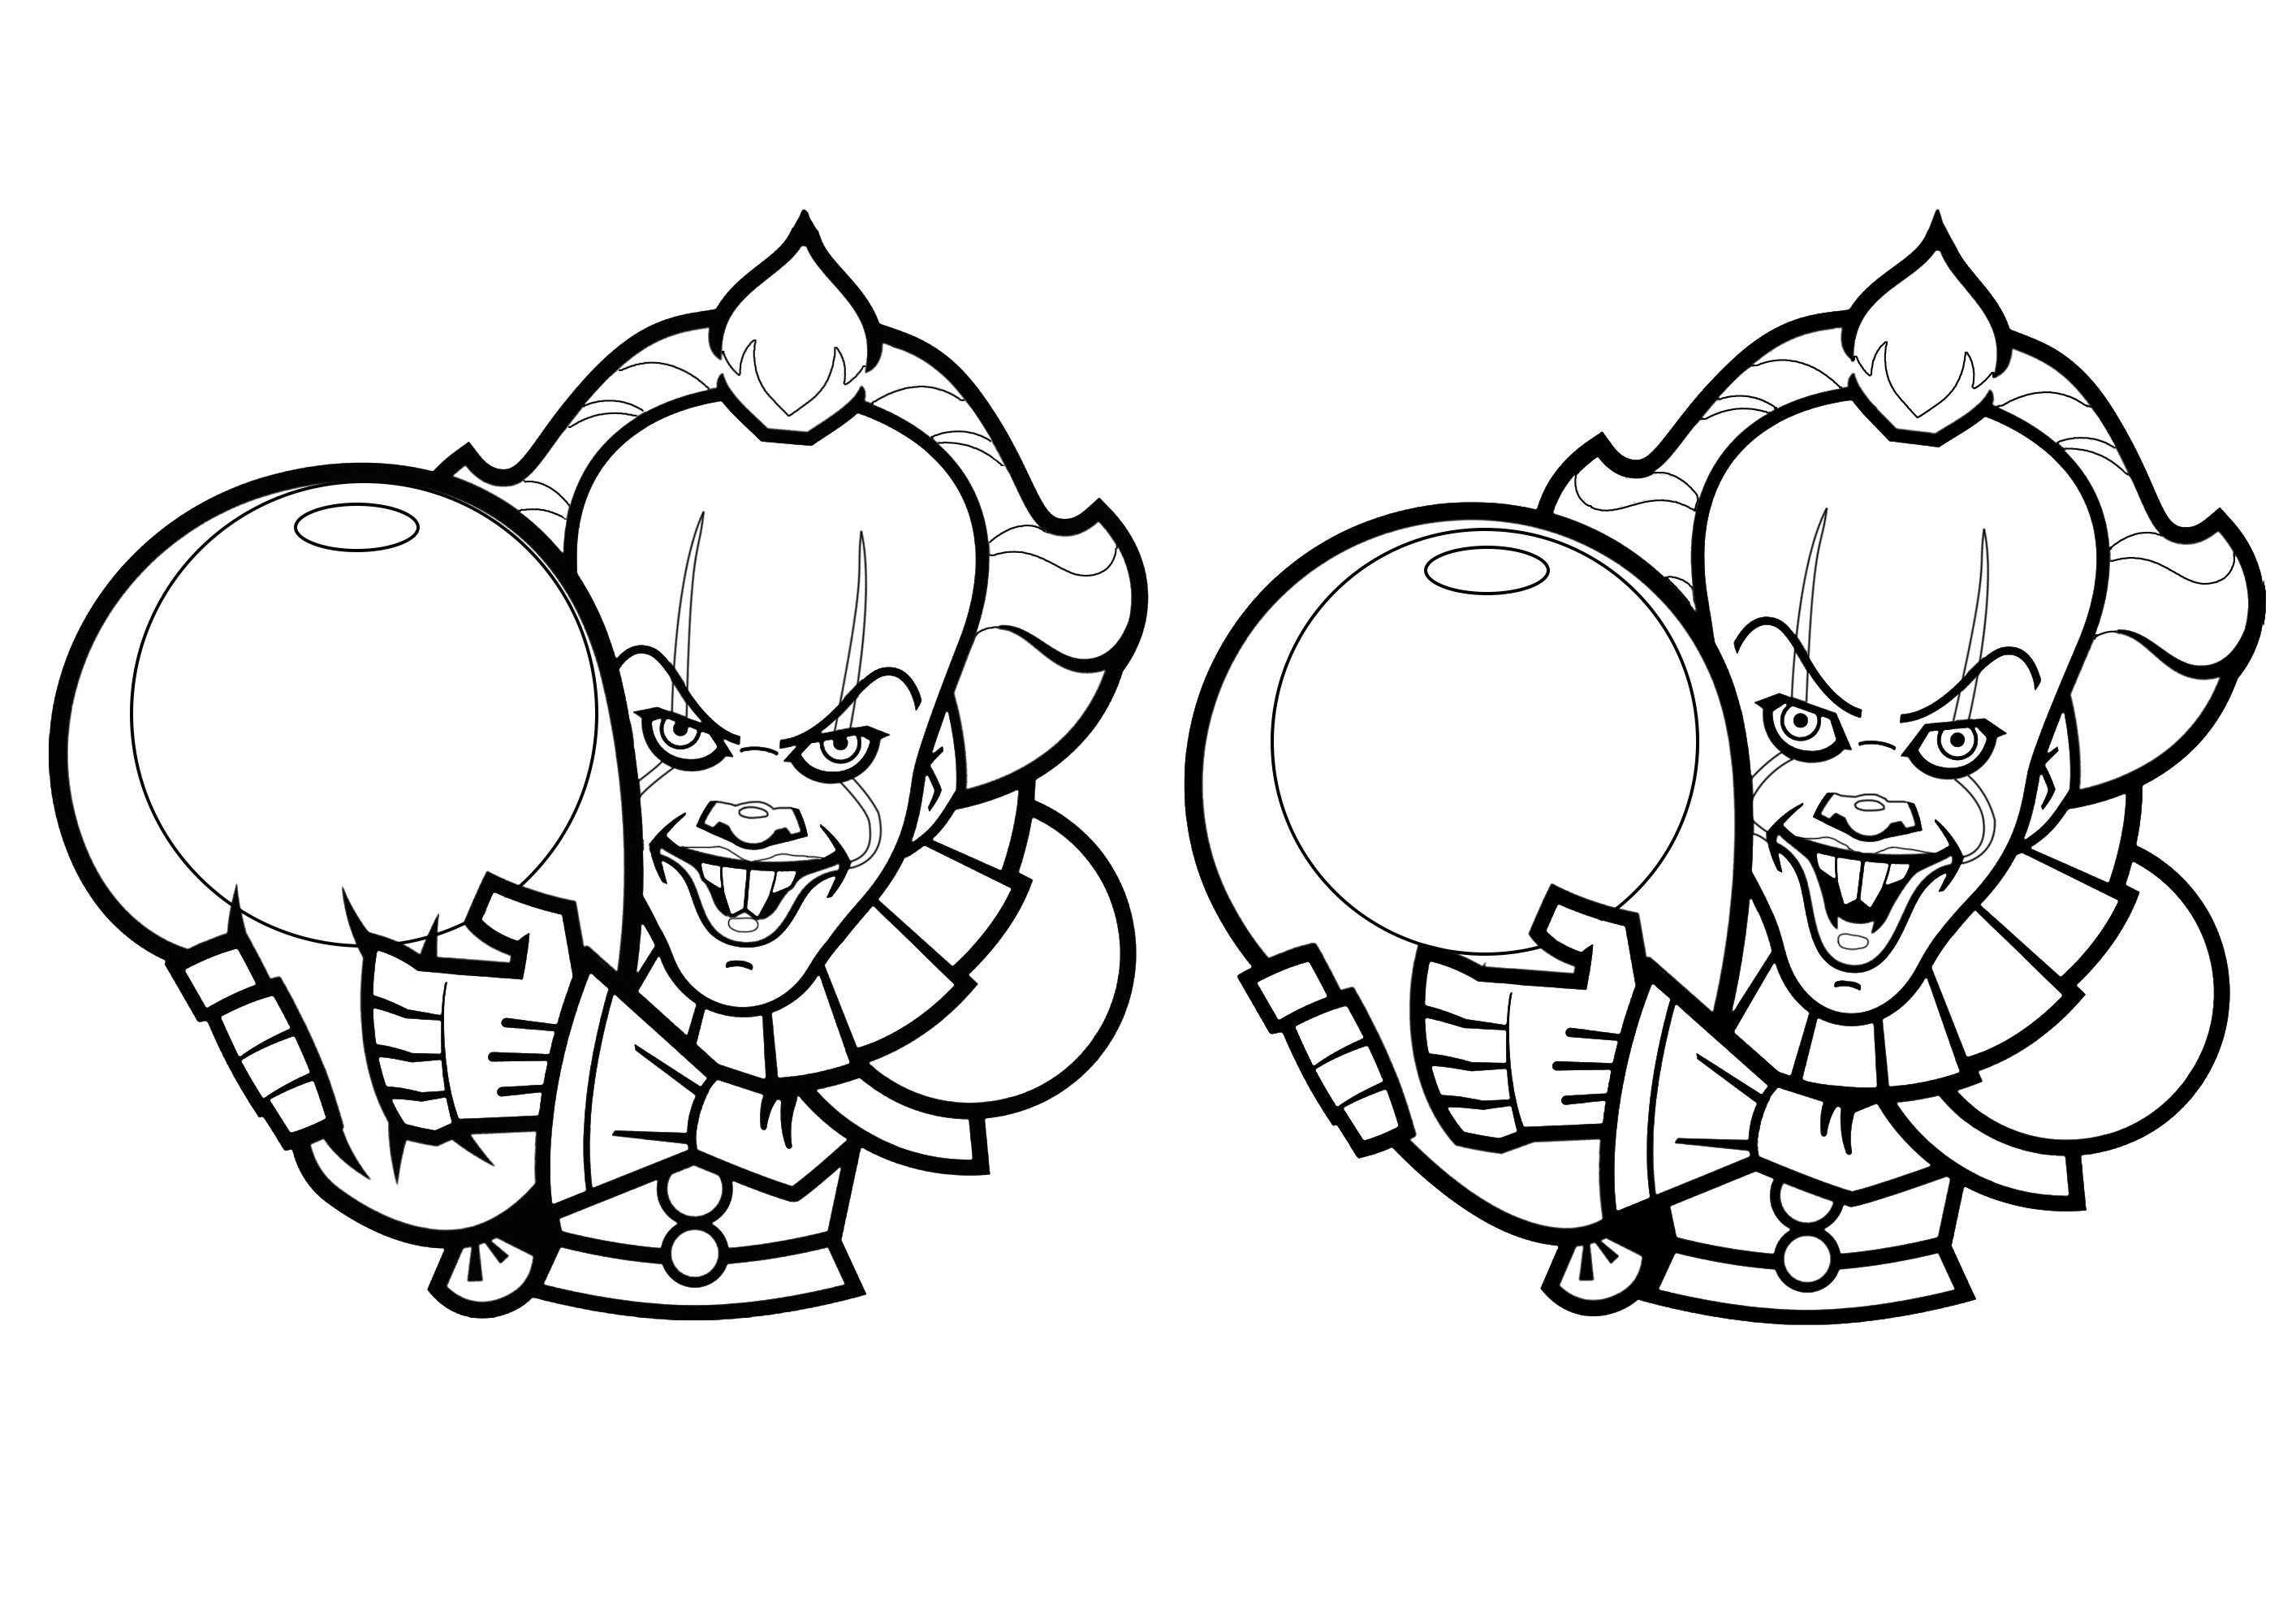 pennywise-coloring-pages-coloring-home